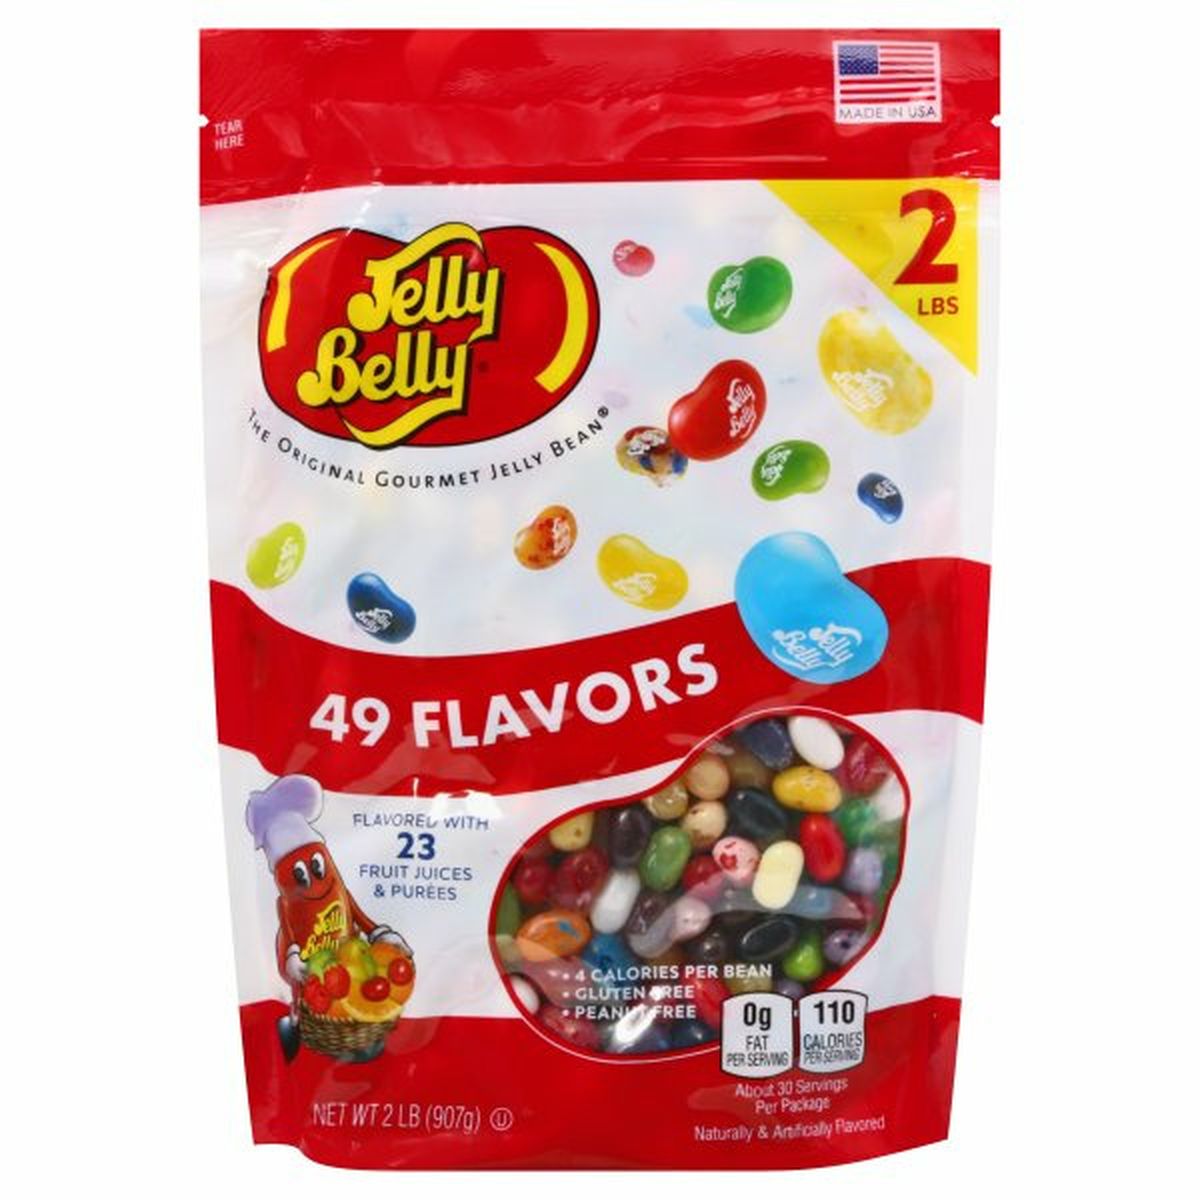 Calories in Jelly Belly Jelly Beans, 49 Flavors